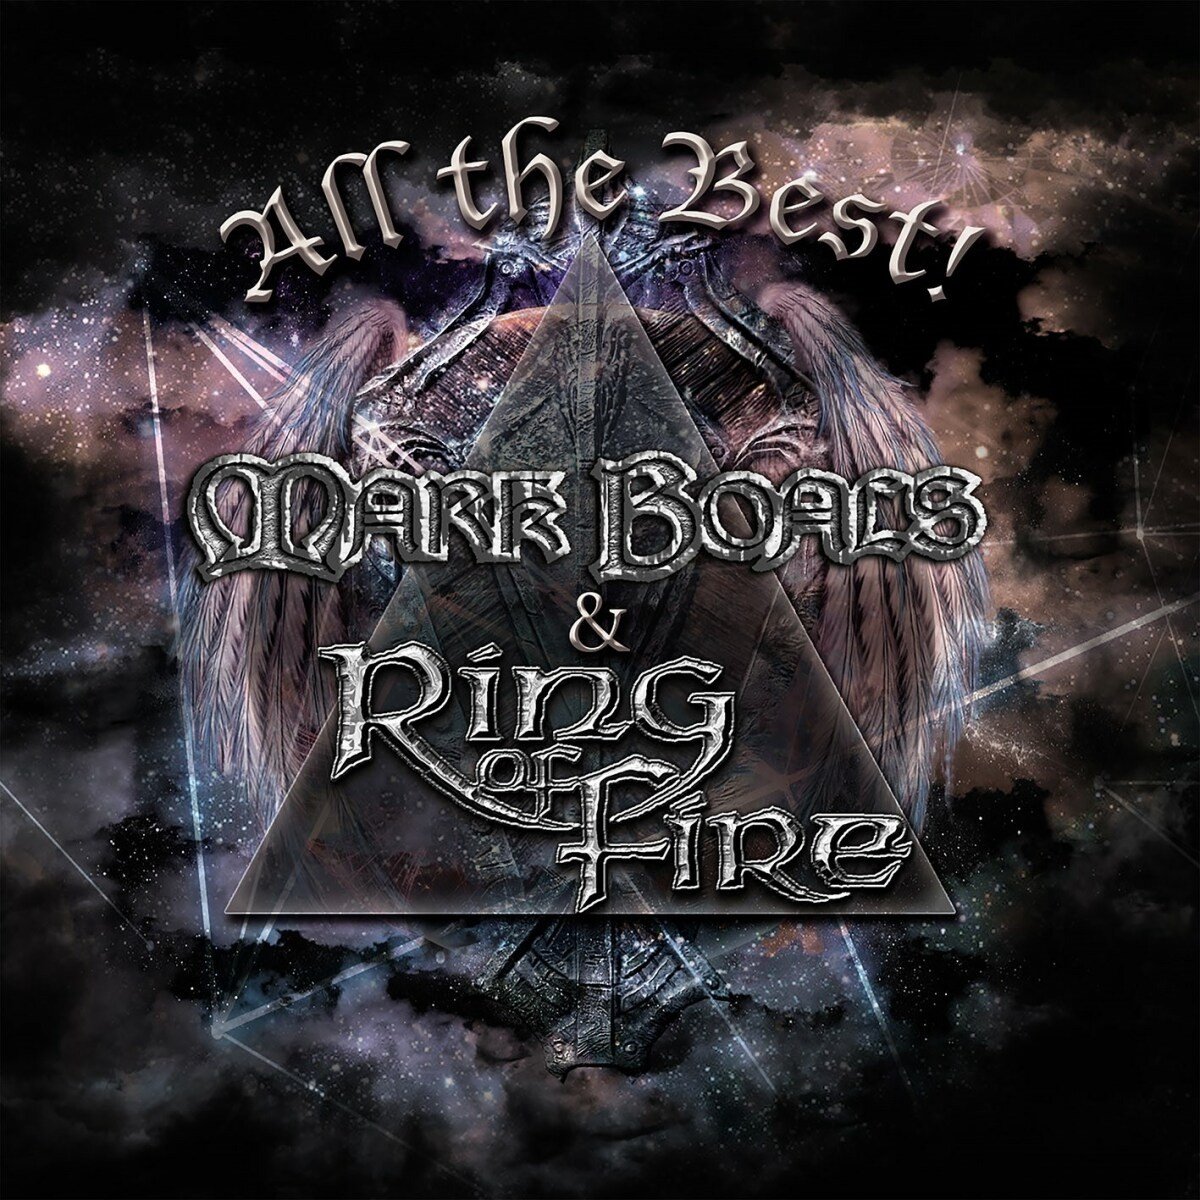 Mark Boals & Ring Of Fire - All The Best! (2 CD)